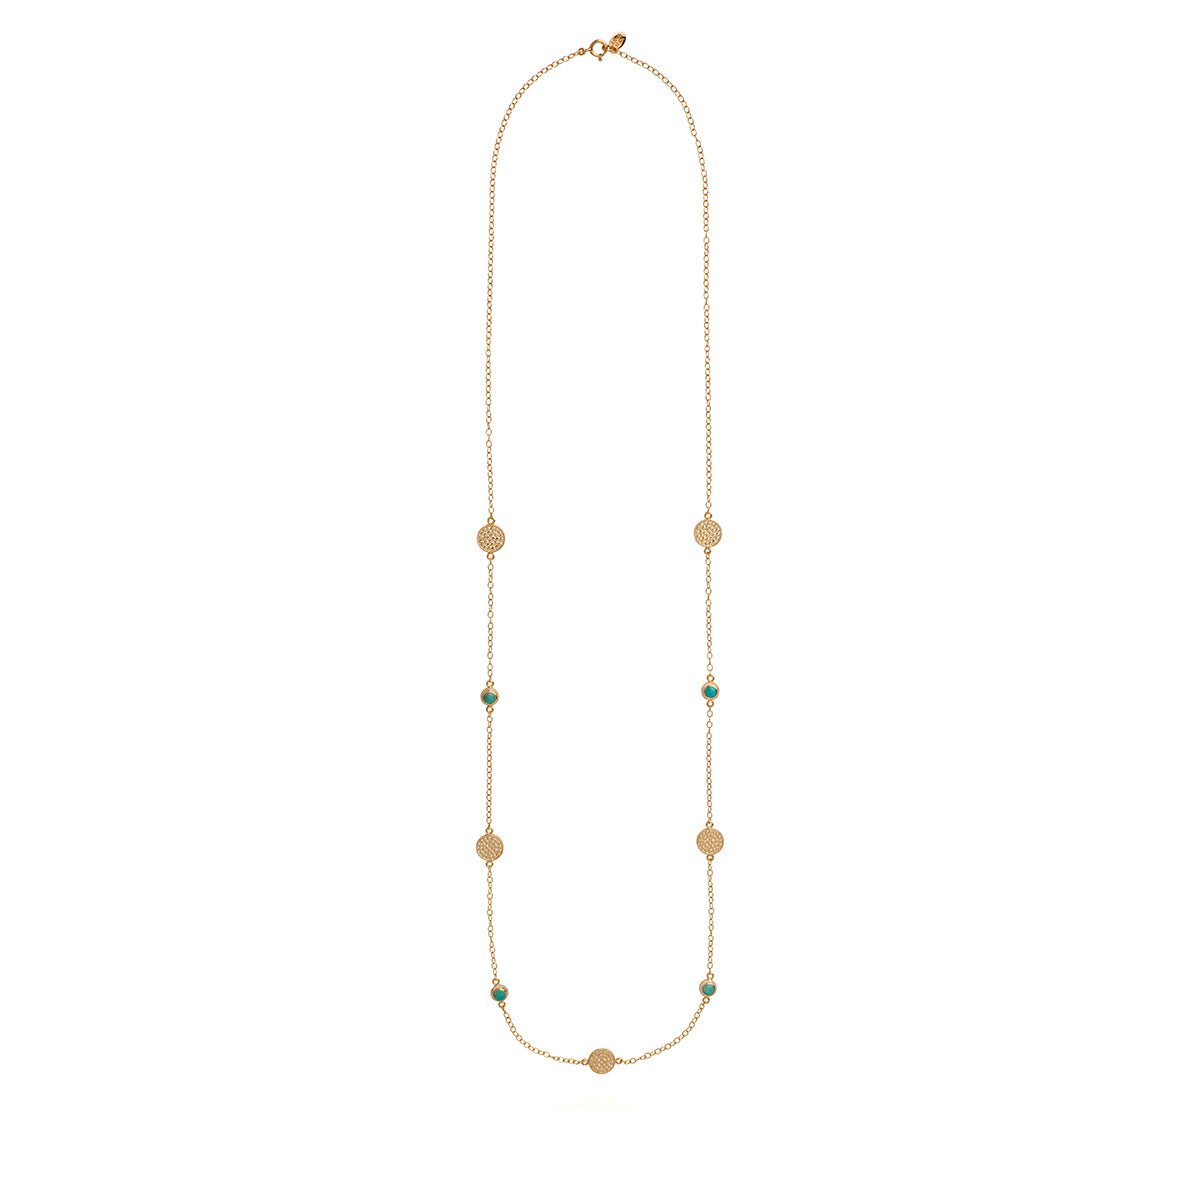 AB NK10085 Long multi disc necklace in gold, turquoise